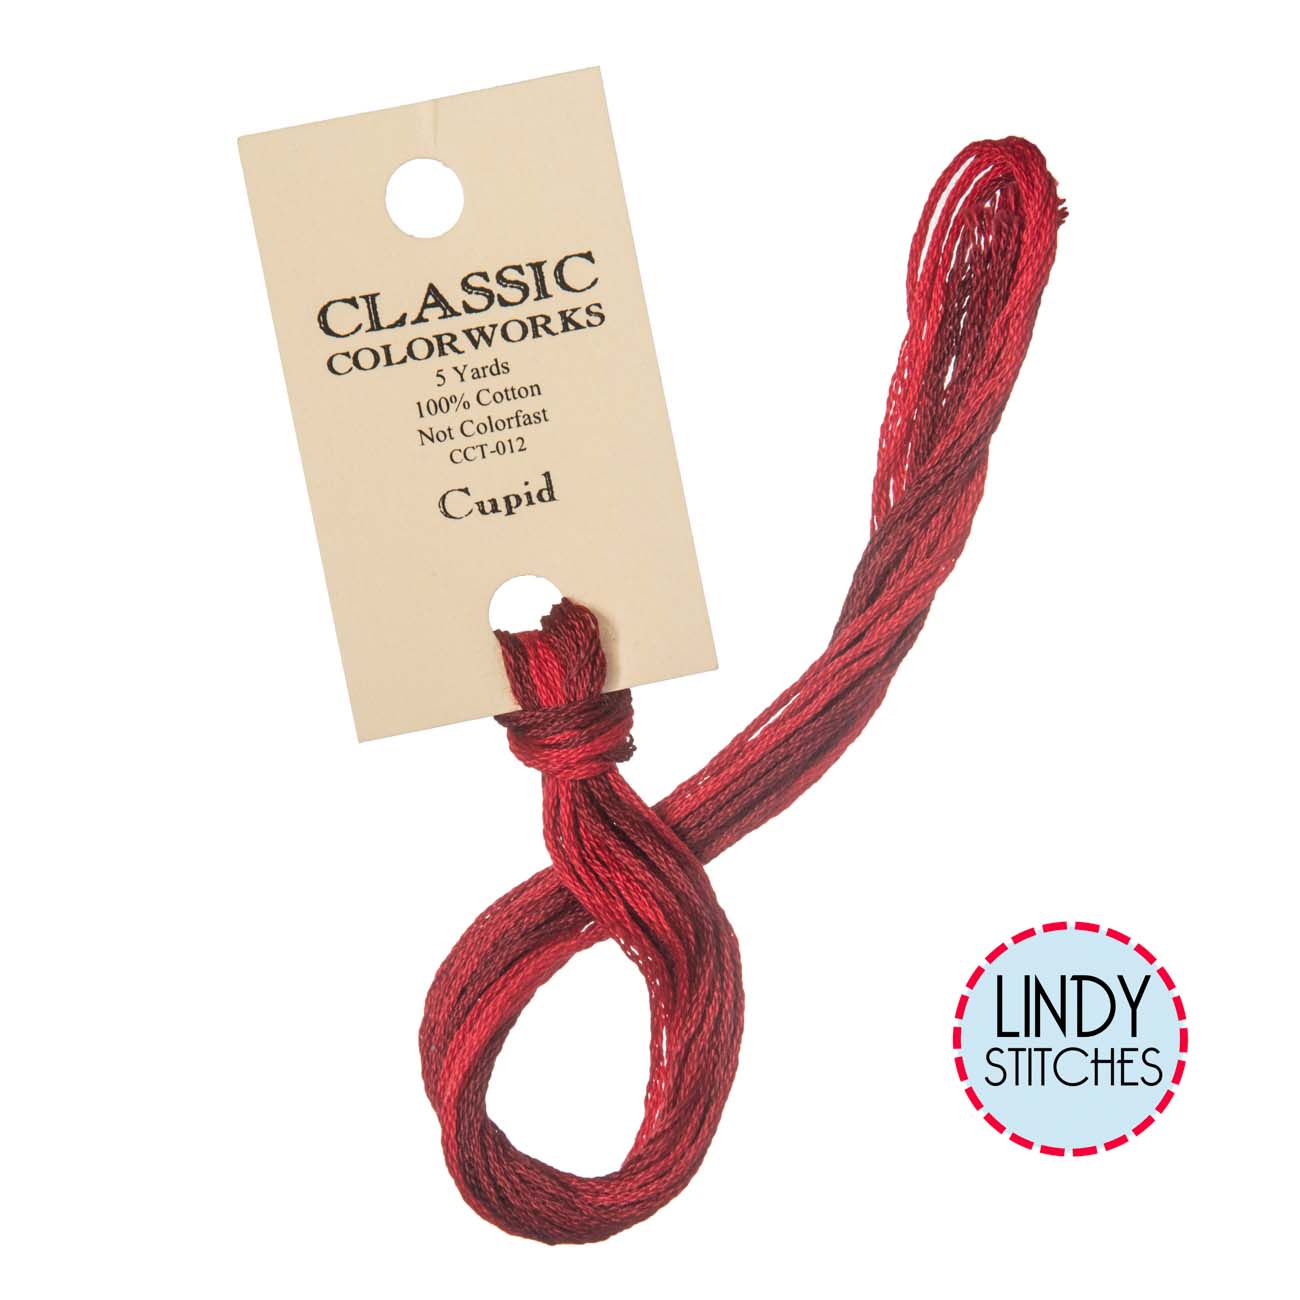 Cupid Classic Colorworks Floss Hand Dyed Cotton Skein